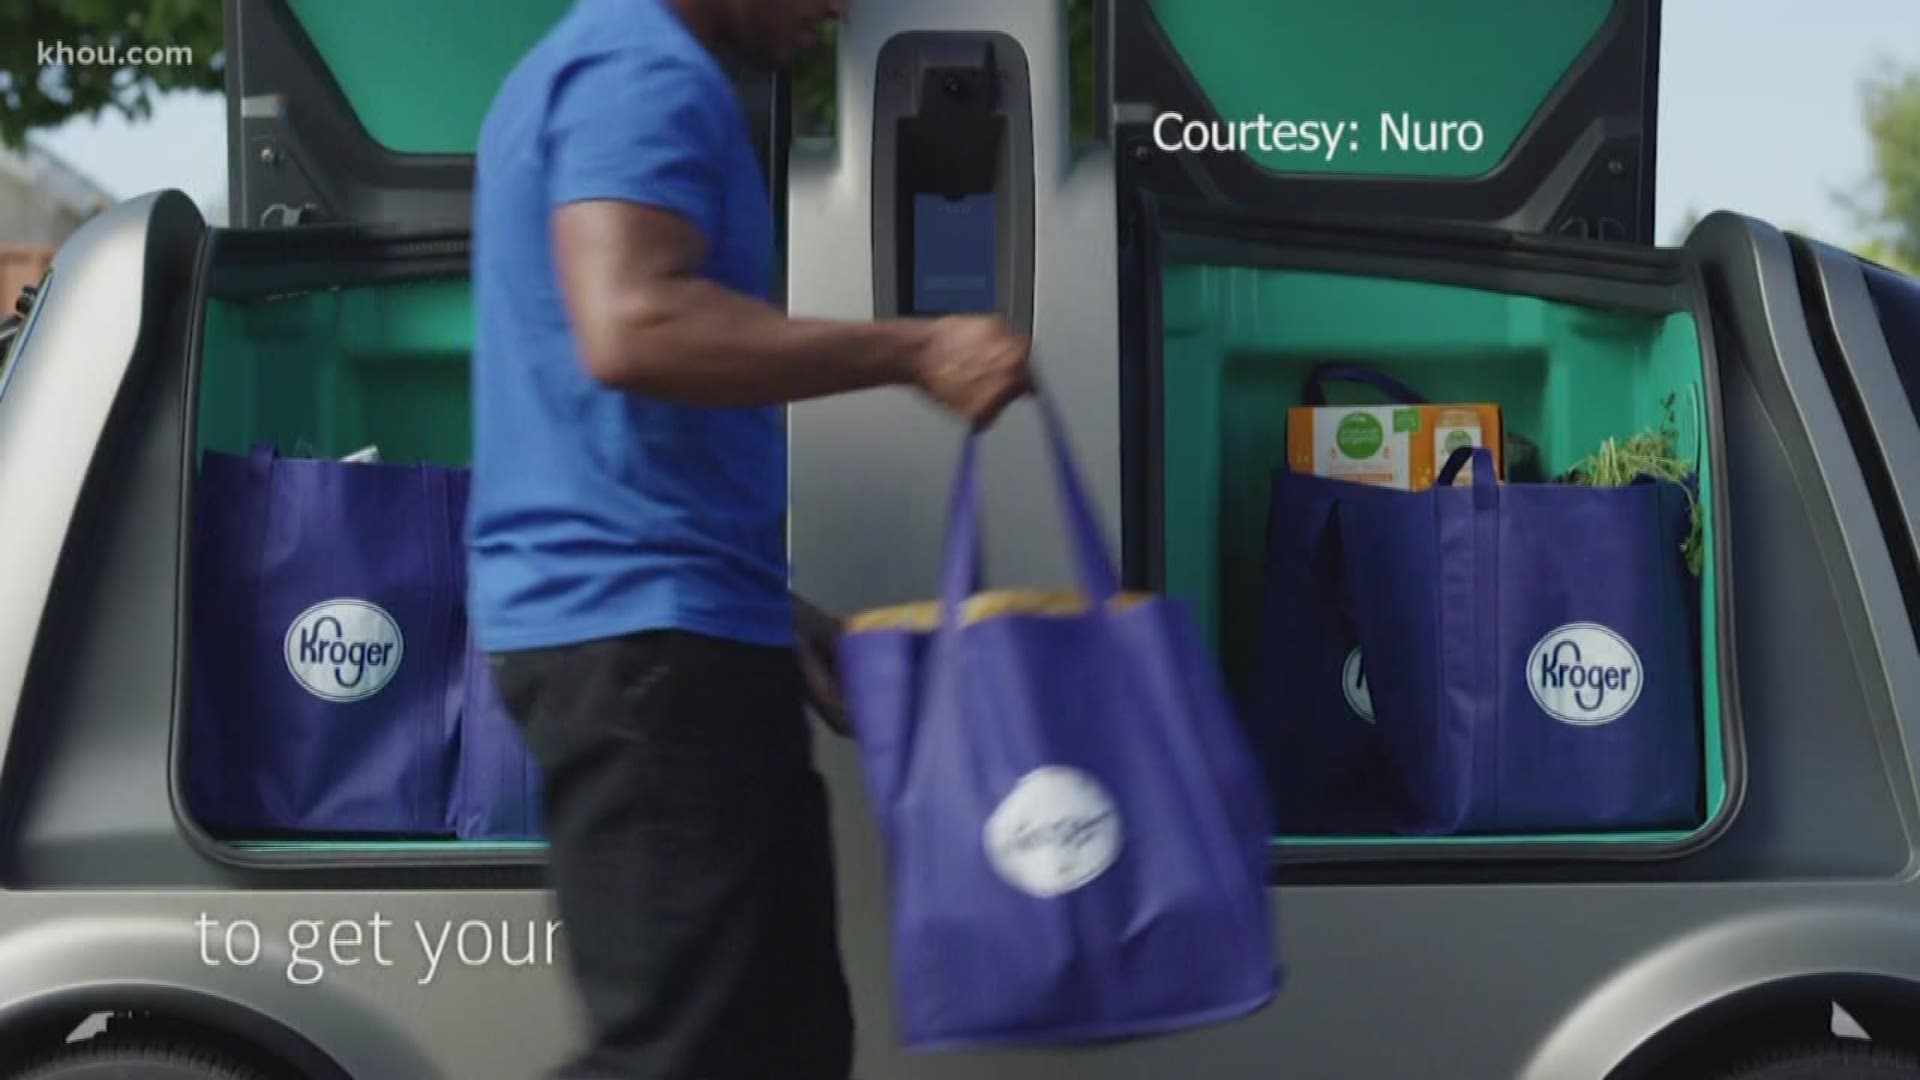 Robotics company Nuro is launching its autonomous grocery delivery service in Houston